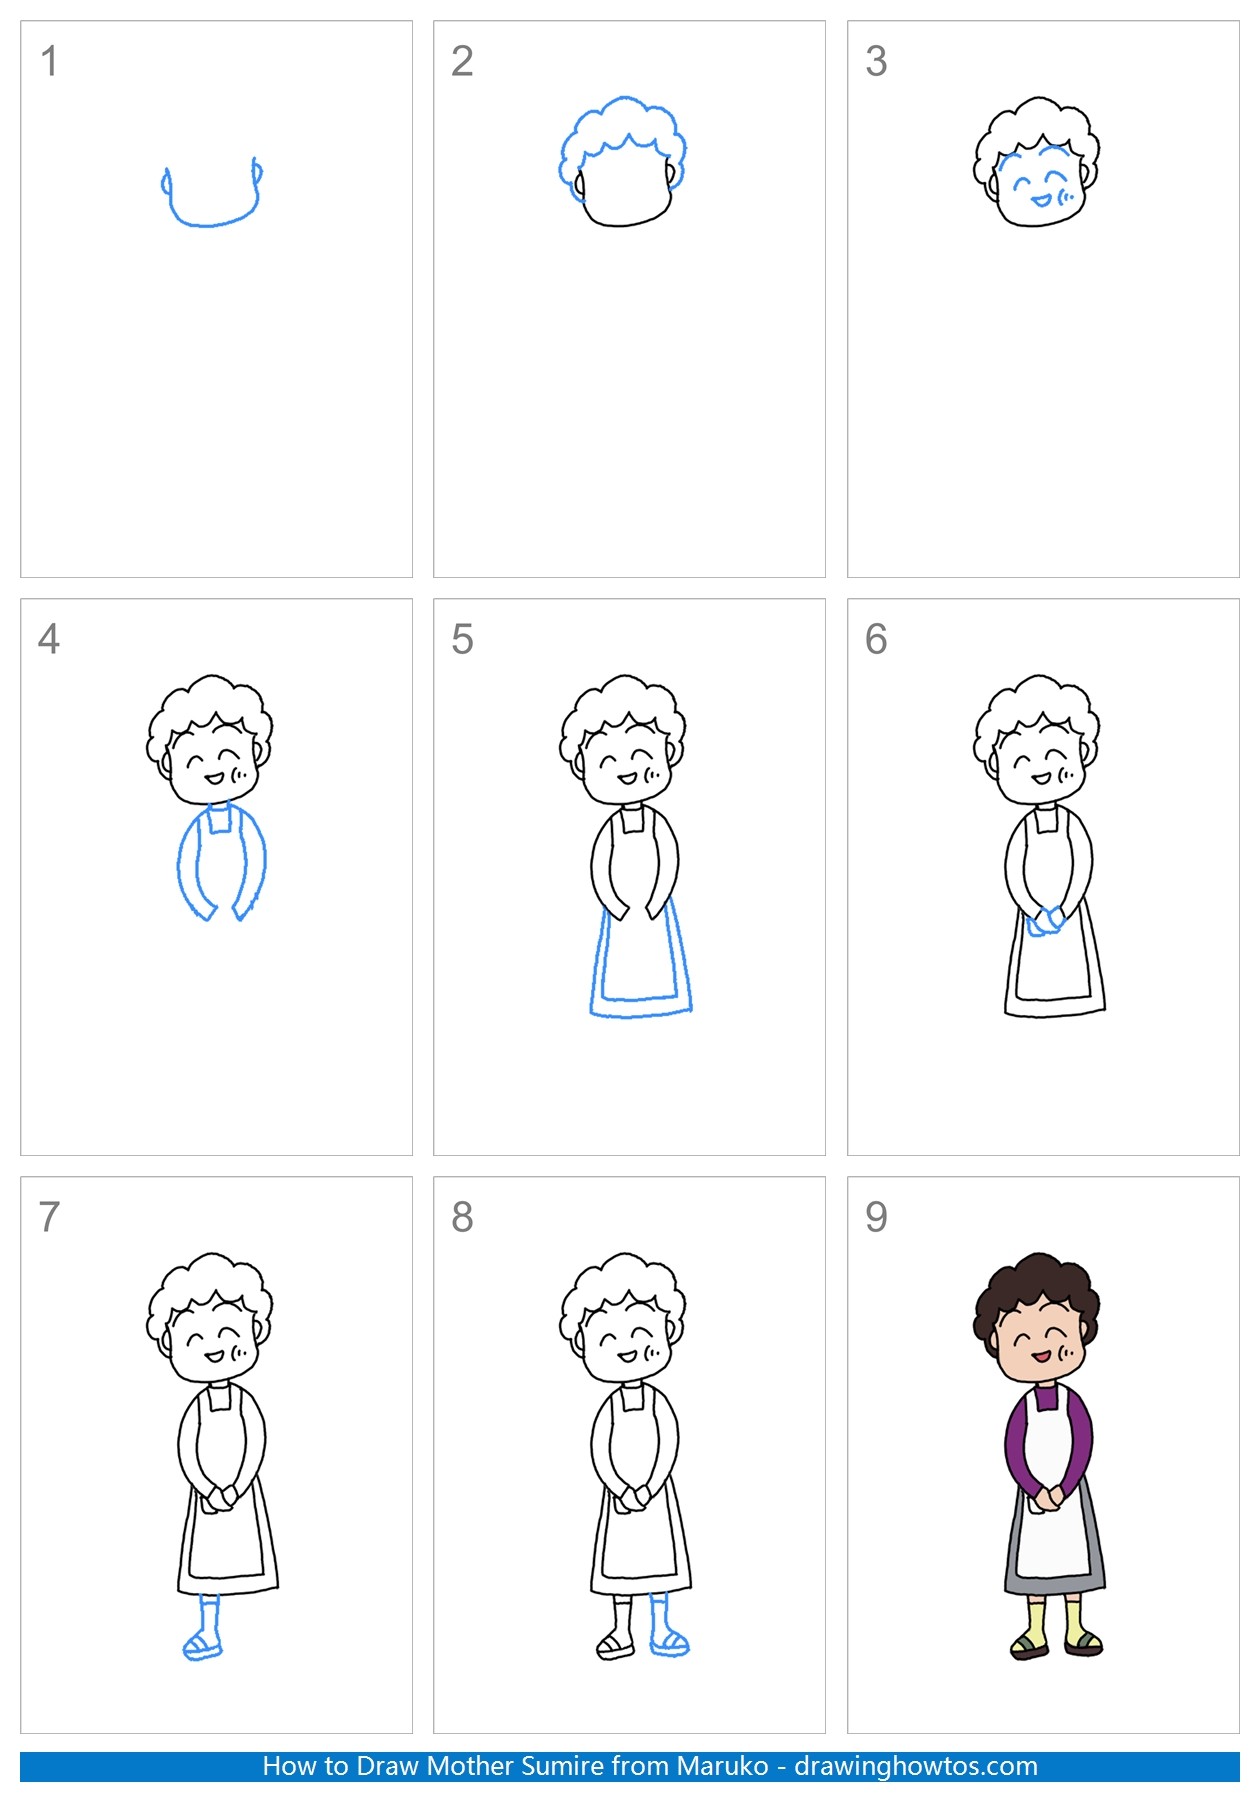 How to Draw Mother Sumire from Maruko Step by Step